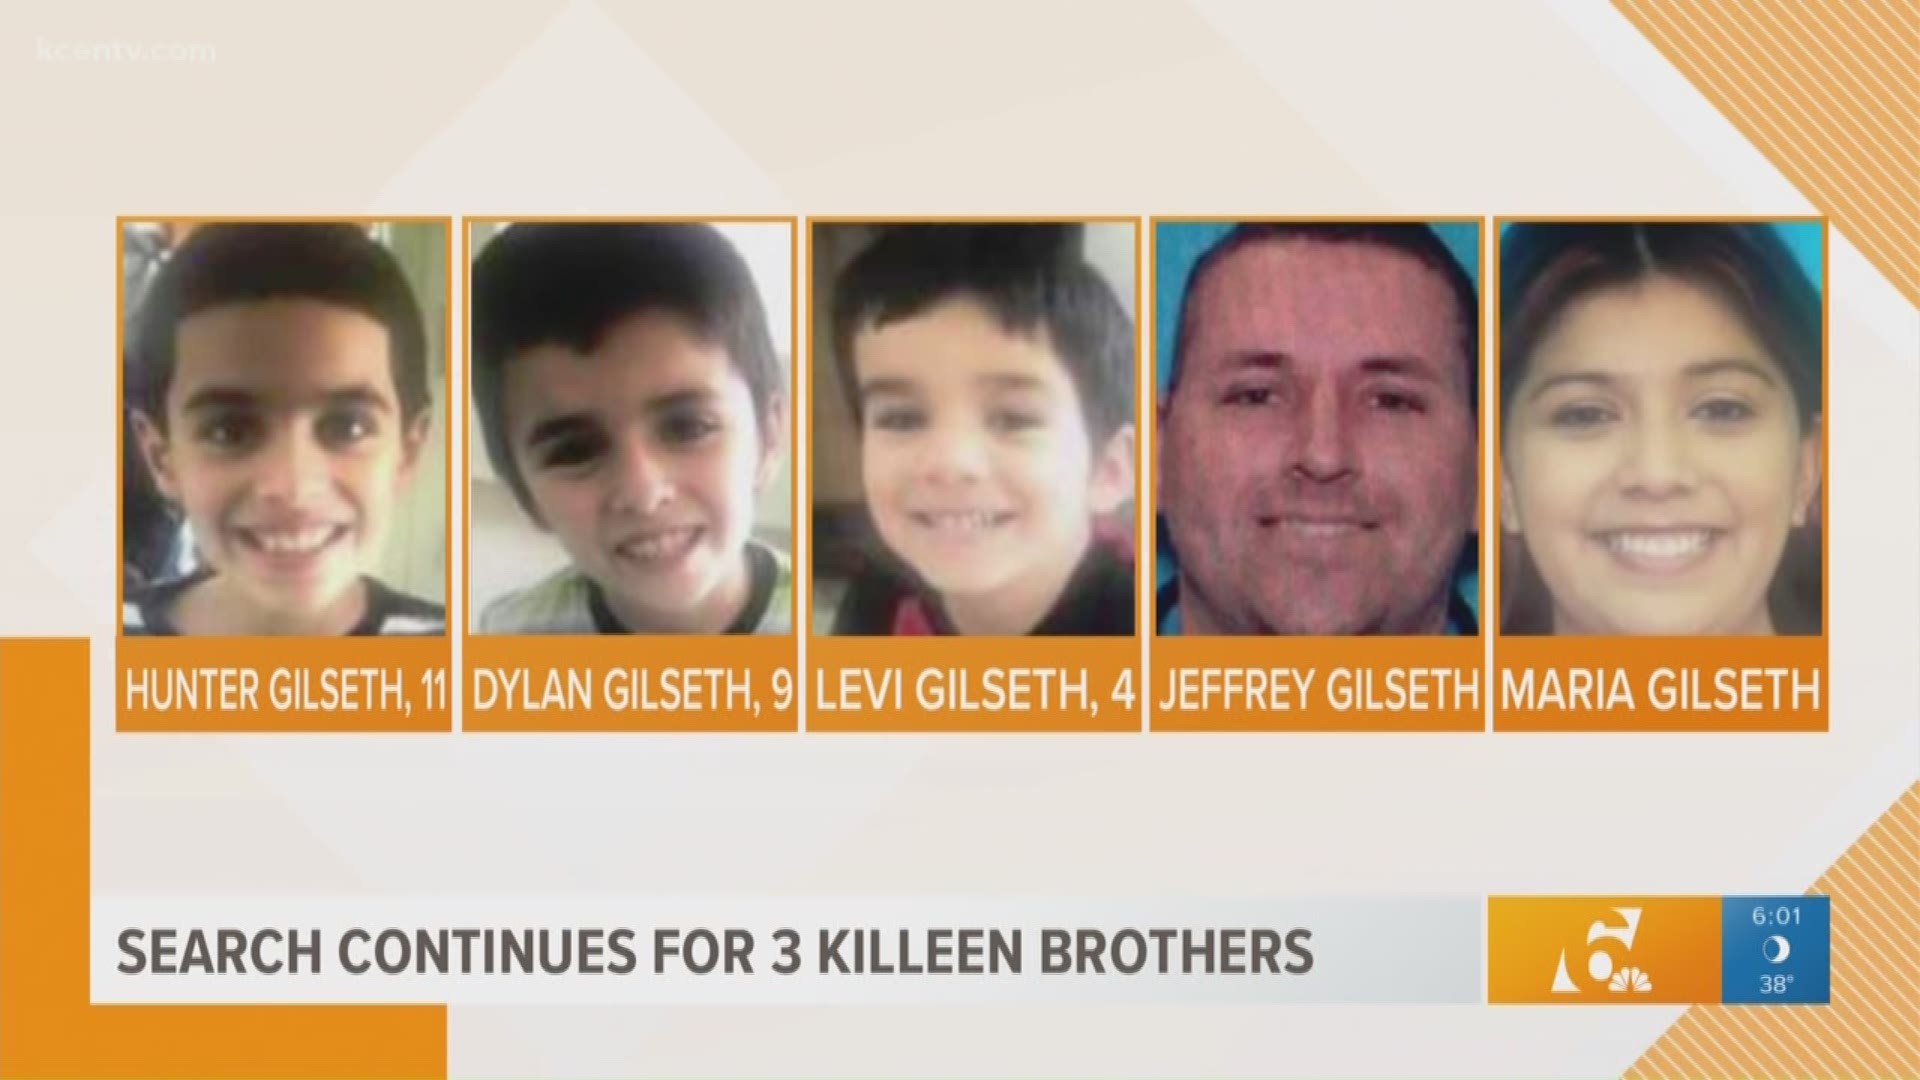 Officials are searching for three brothers taken from Killeen, who are believed to be in “imminent danger,” according to the McCulloch County Sheriff’s office. STORY: https://www.kcentv.com/article/news/local/3-brothers-in-imminent-danger-after-parents-kidnap-them-during-supervised-visit-in-killeen-police-say/500-3c17e307-db7b-49ba-9e1a-162e952f9b2e